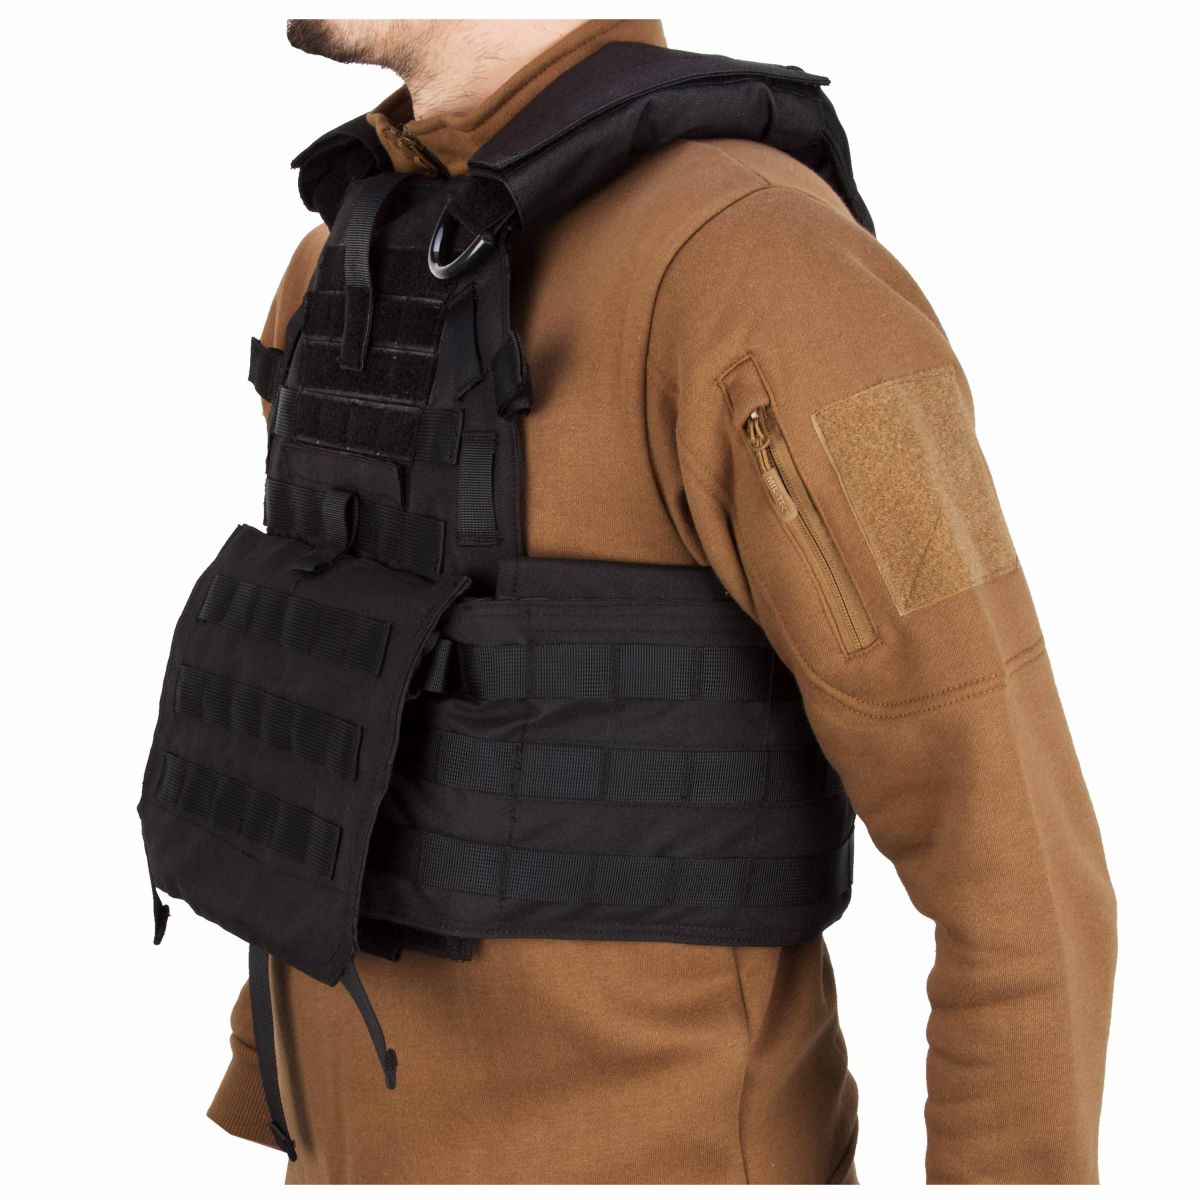 Purchase the Invader Gear 6094A-RS Plate Carrier black by ASMC